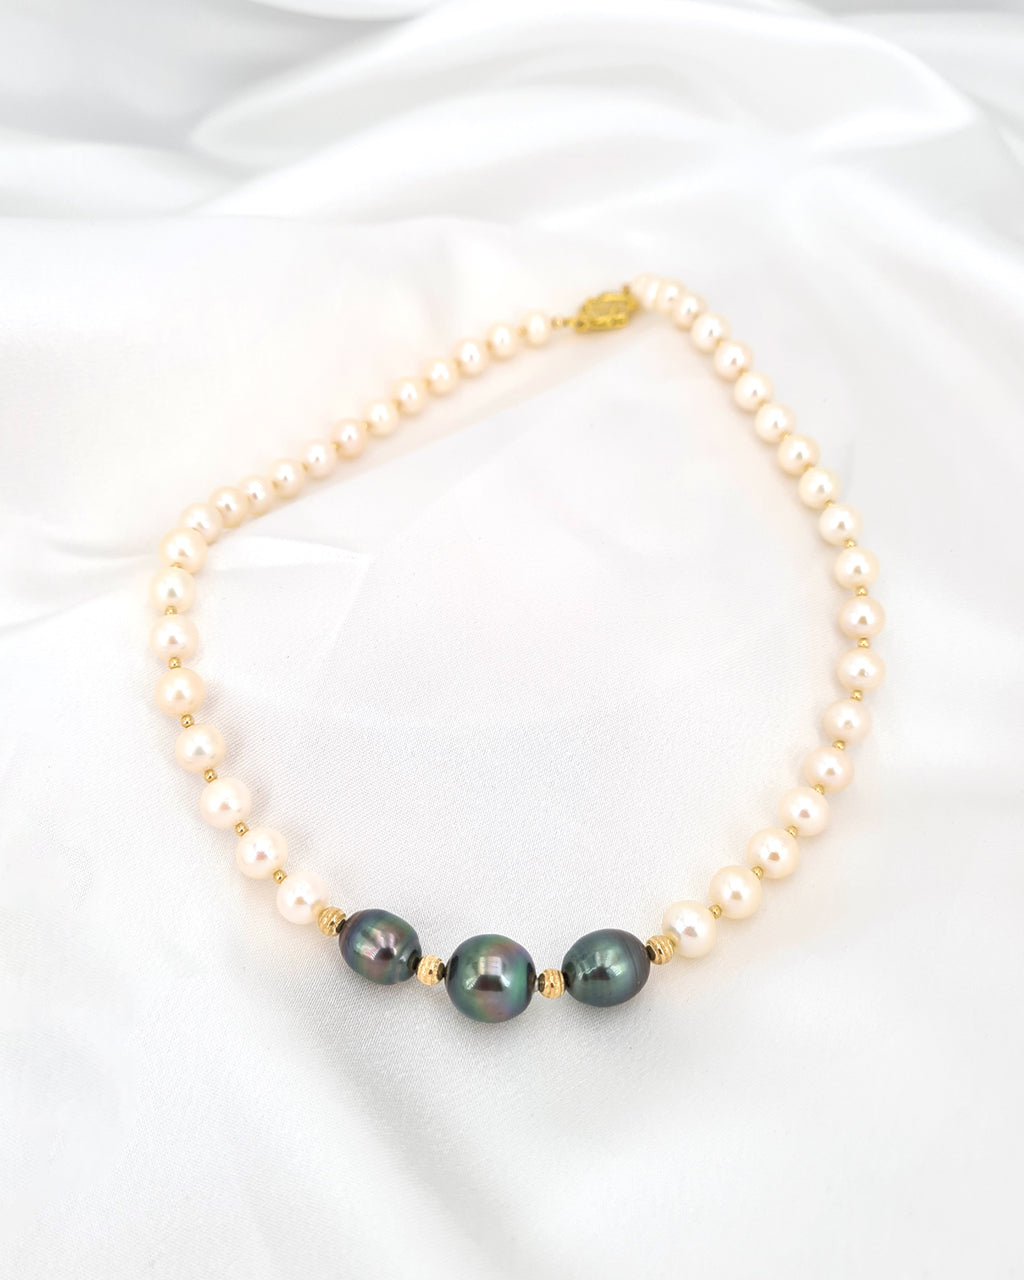 10-Strand Freshwater Pearl Necklace With Gold Beads & Clasp